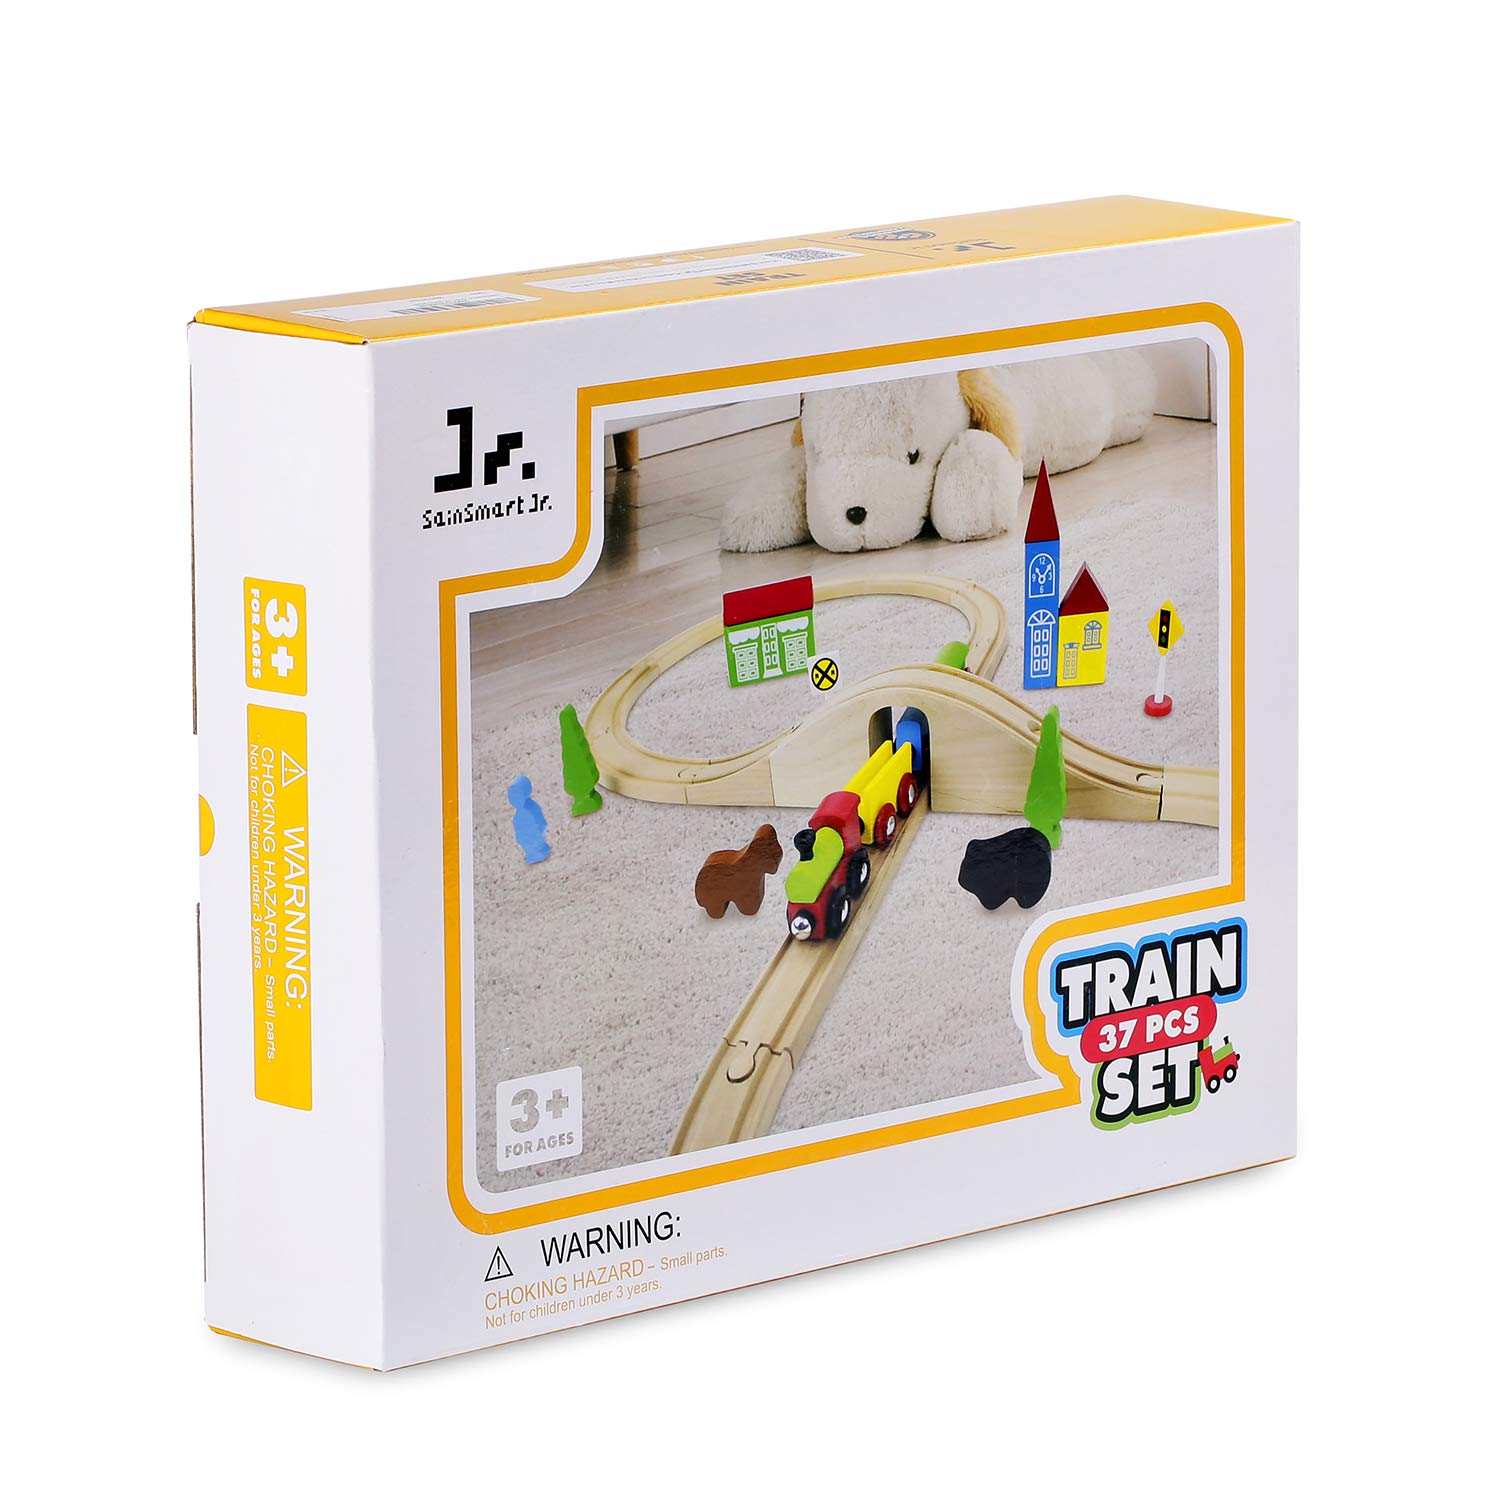 SainSmart Jr. Wooden Train Set for Toddler with Double-Side Train Tracks Fits Brio, Thomas, Melissa and Doug, Kids Wood Toy Train for 3,4,5 Year old Boys and Girls